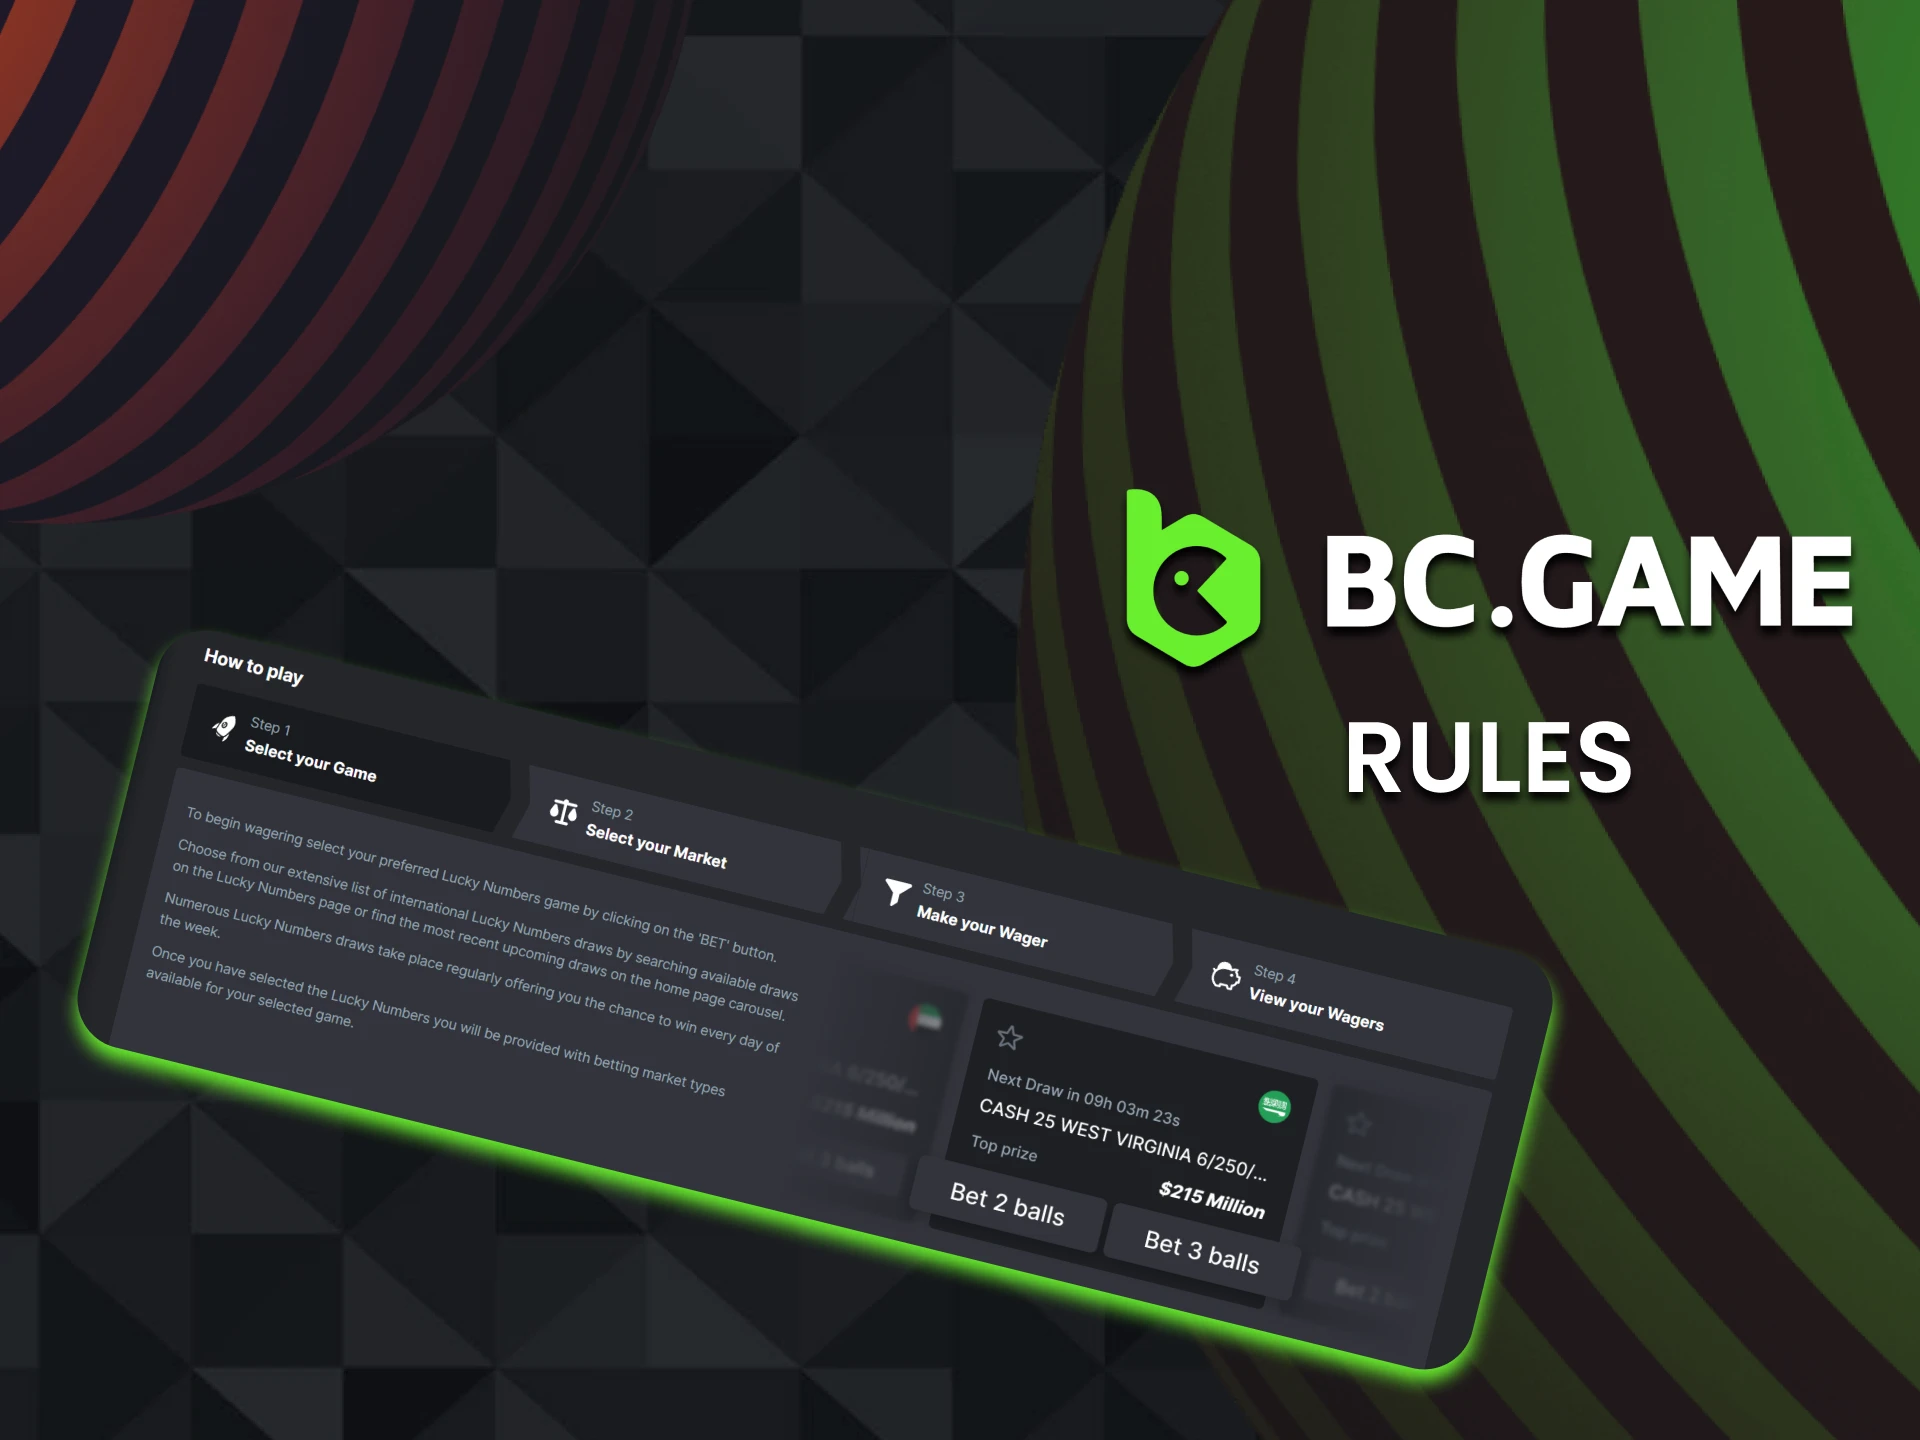 Learn the rules to play lottery games at BC Game.